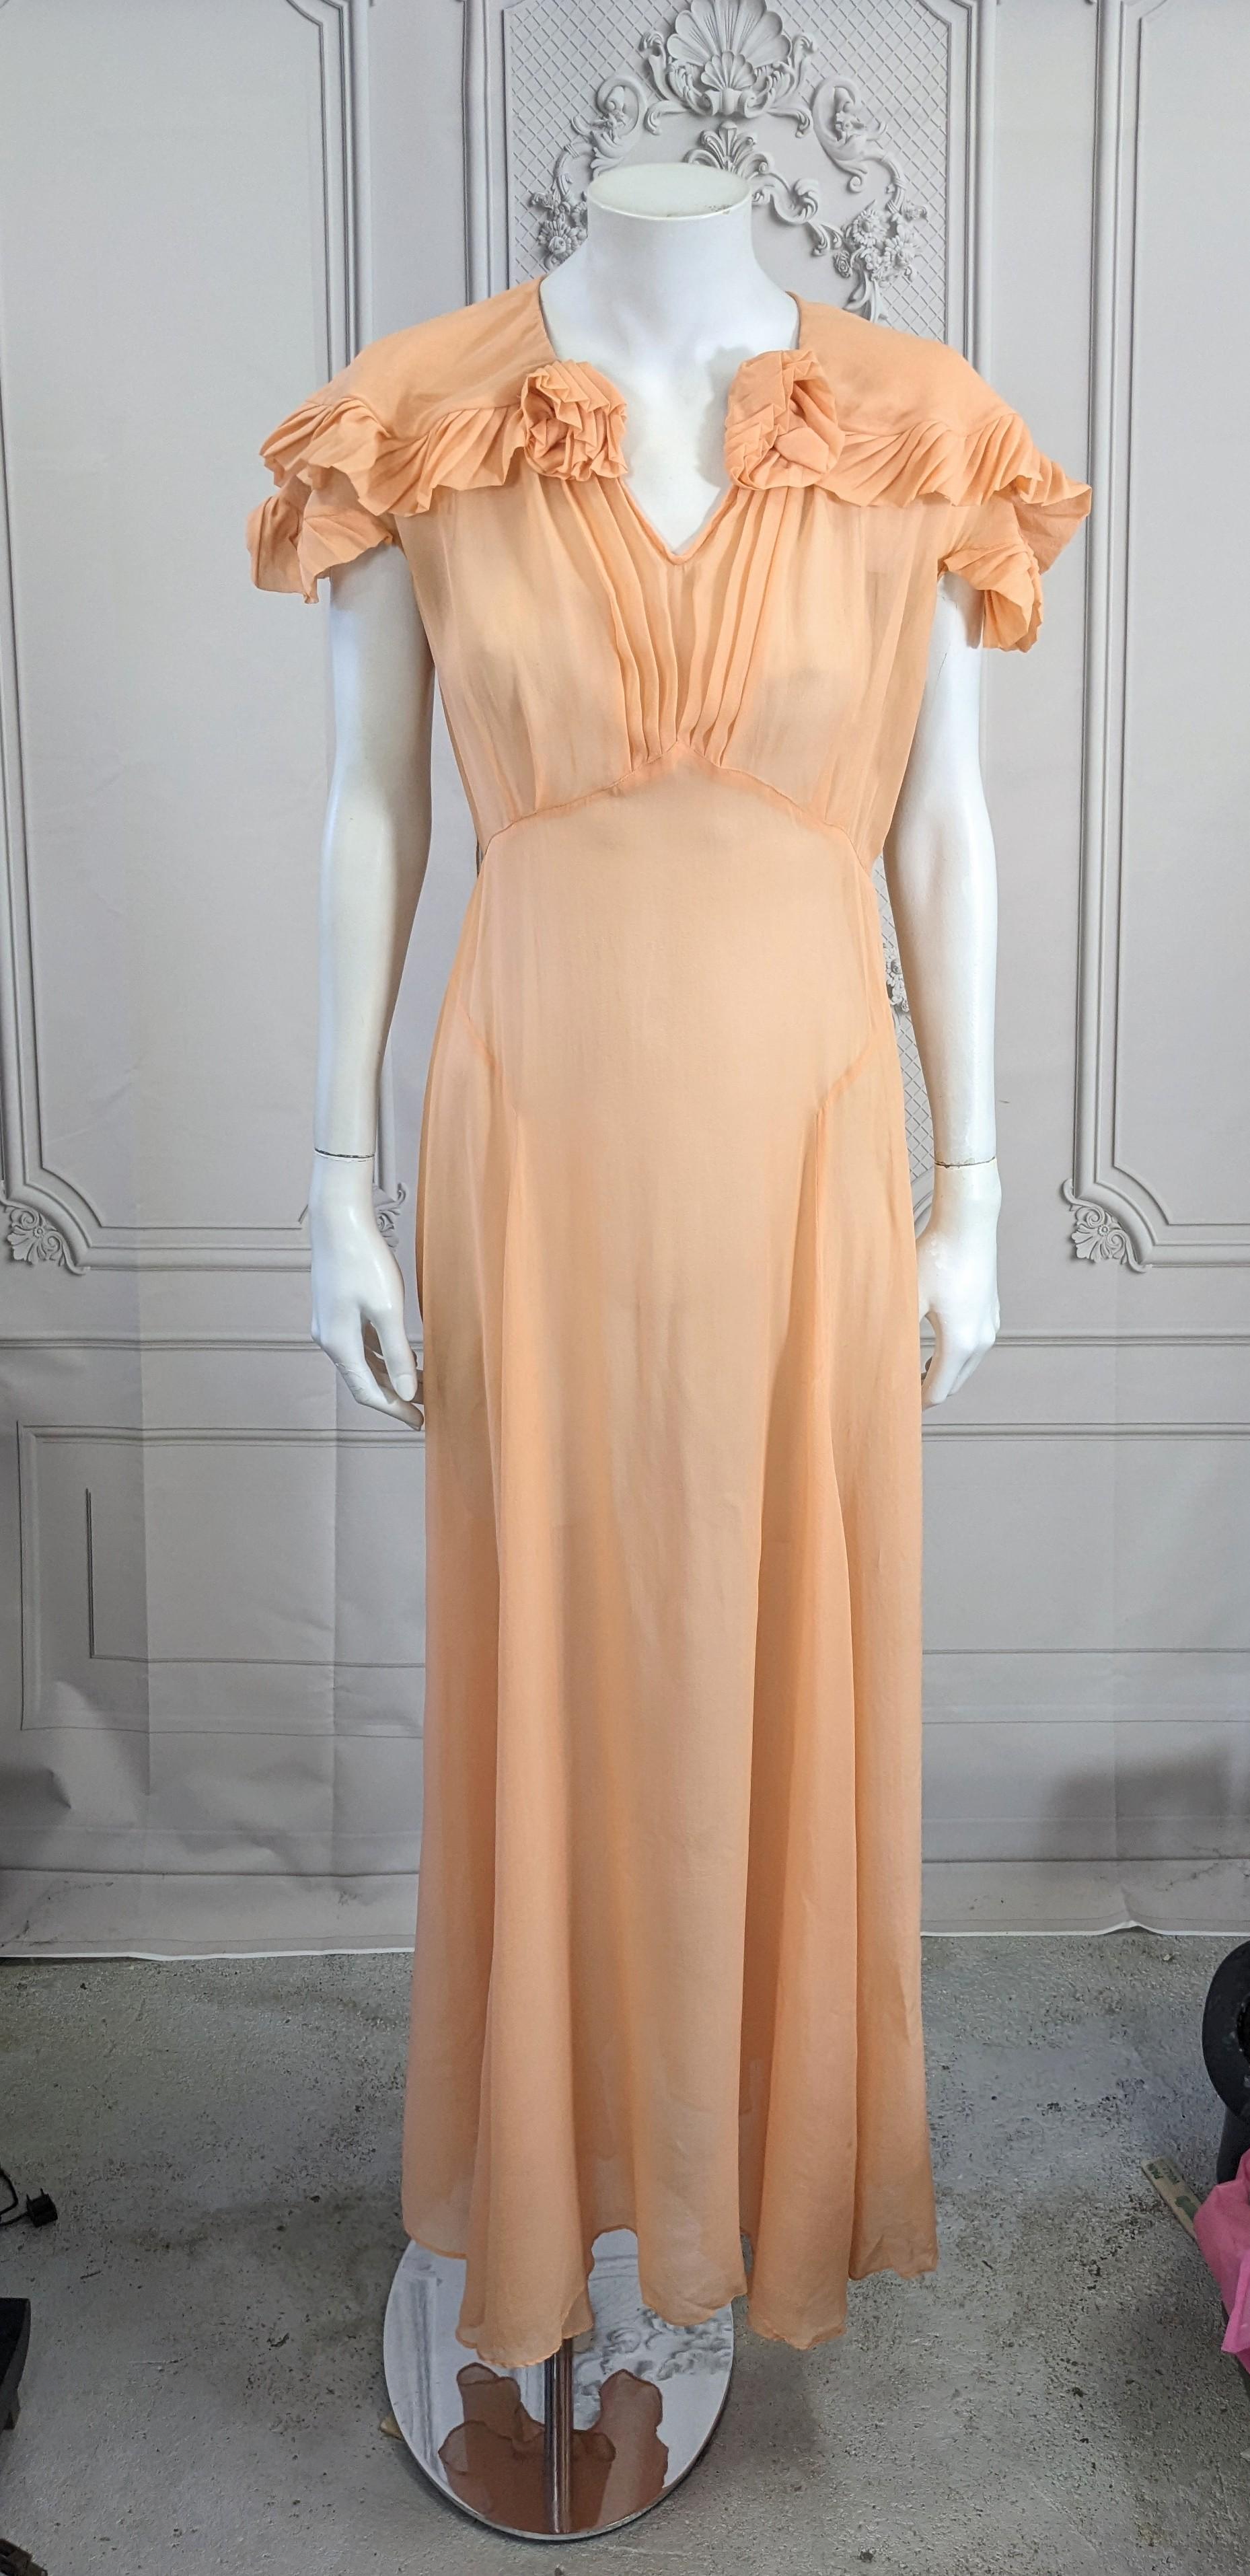 Elegant Peach Silk Chiffon Art Deco Pleated Edge Trimmed Gown from the 1930's. Pleated trim is used to edge the cape collar, sleeves and create neckline flowers. Hook and eye closure at neck with pleated detail down front. Full bias skirt. Gown is